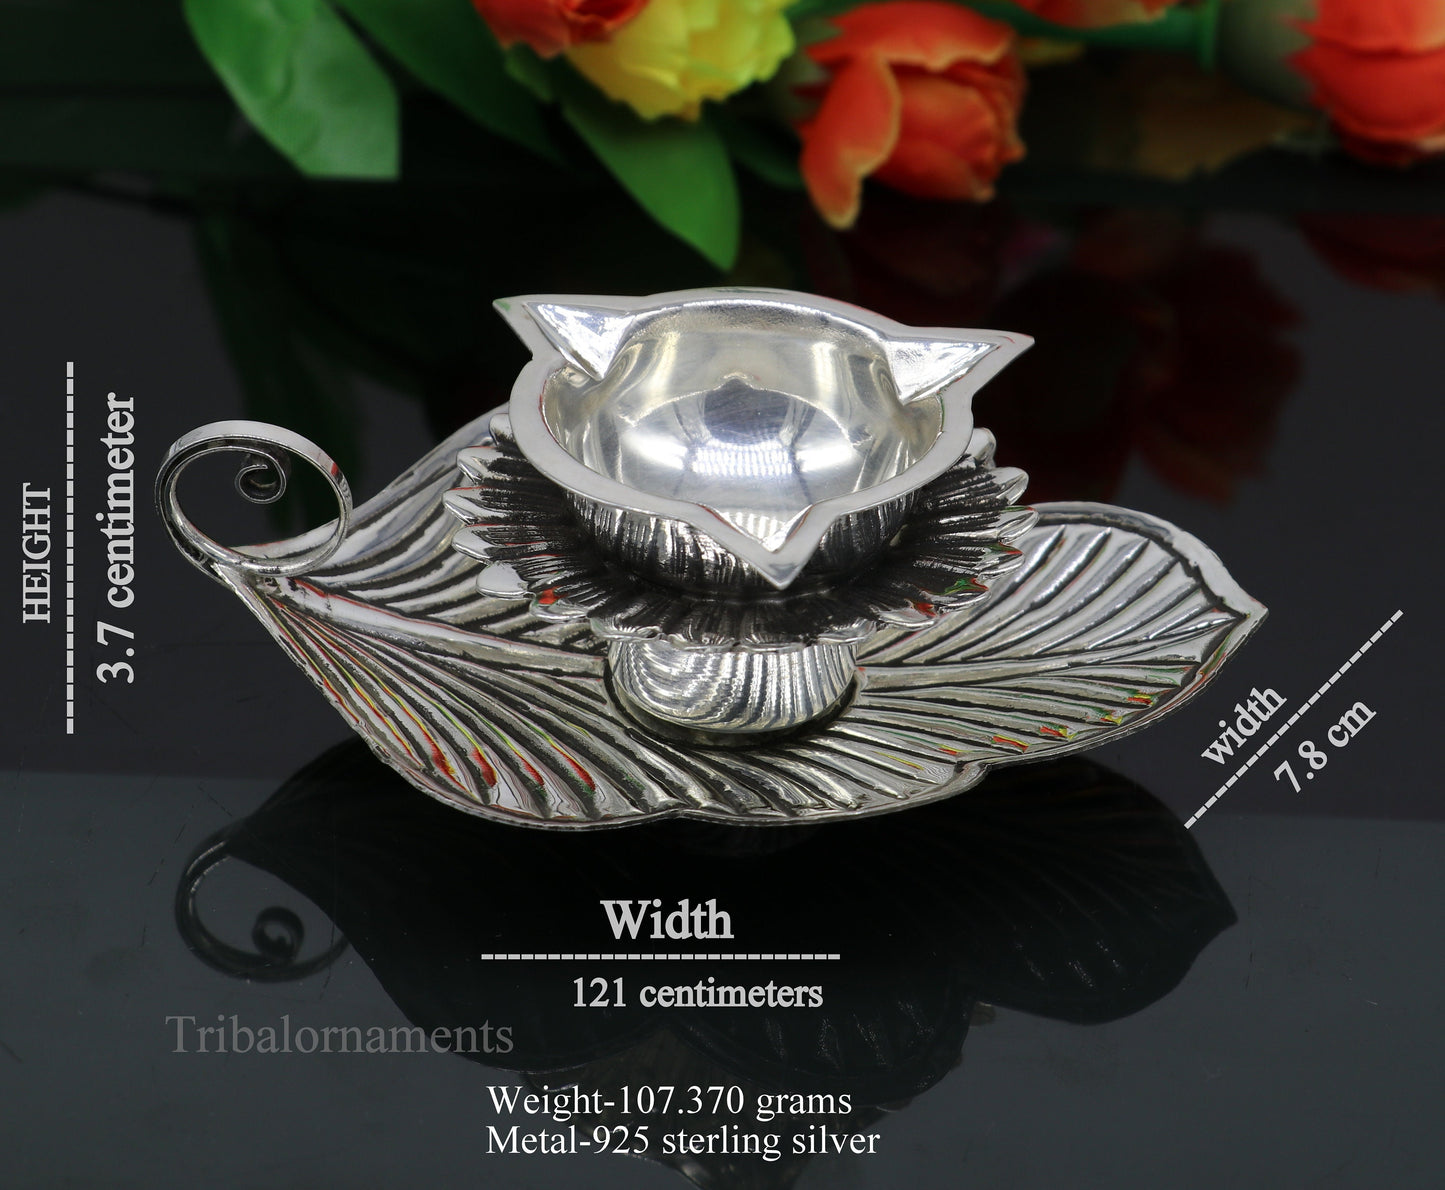 925 sterling silver Divine oil lamp, stunning tree leaf vintage design 3 joth lamp, best gifting puja utensils or article from India su479 - TRIBAL ORNAMENTS